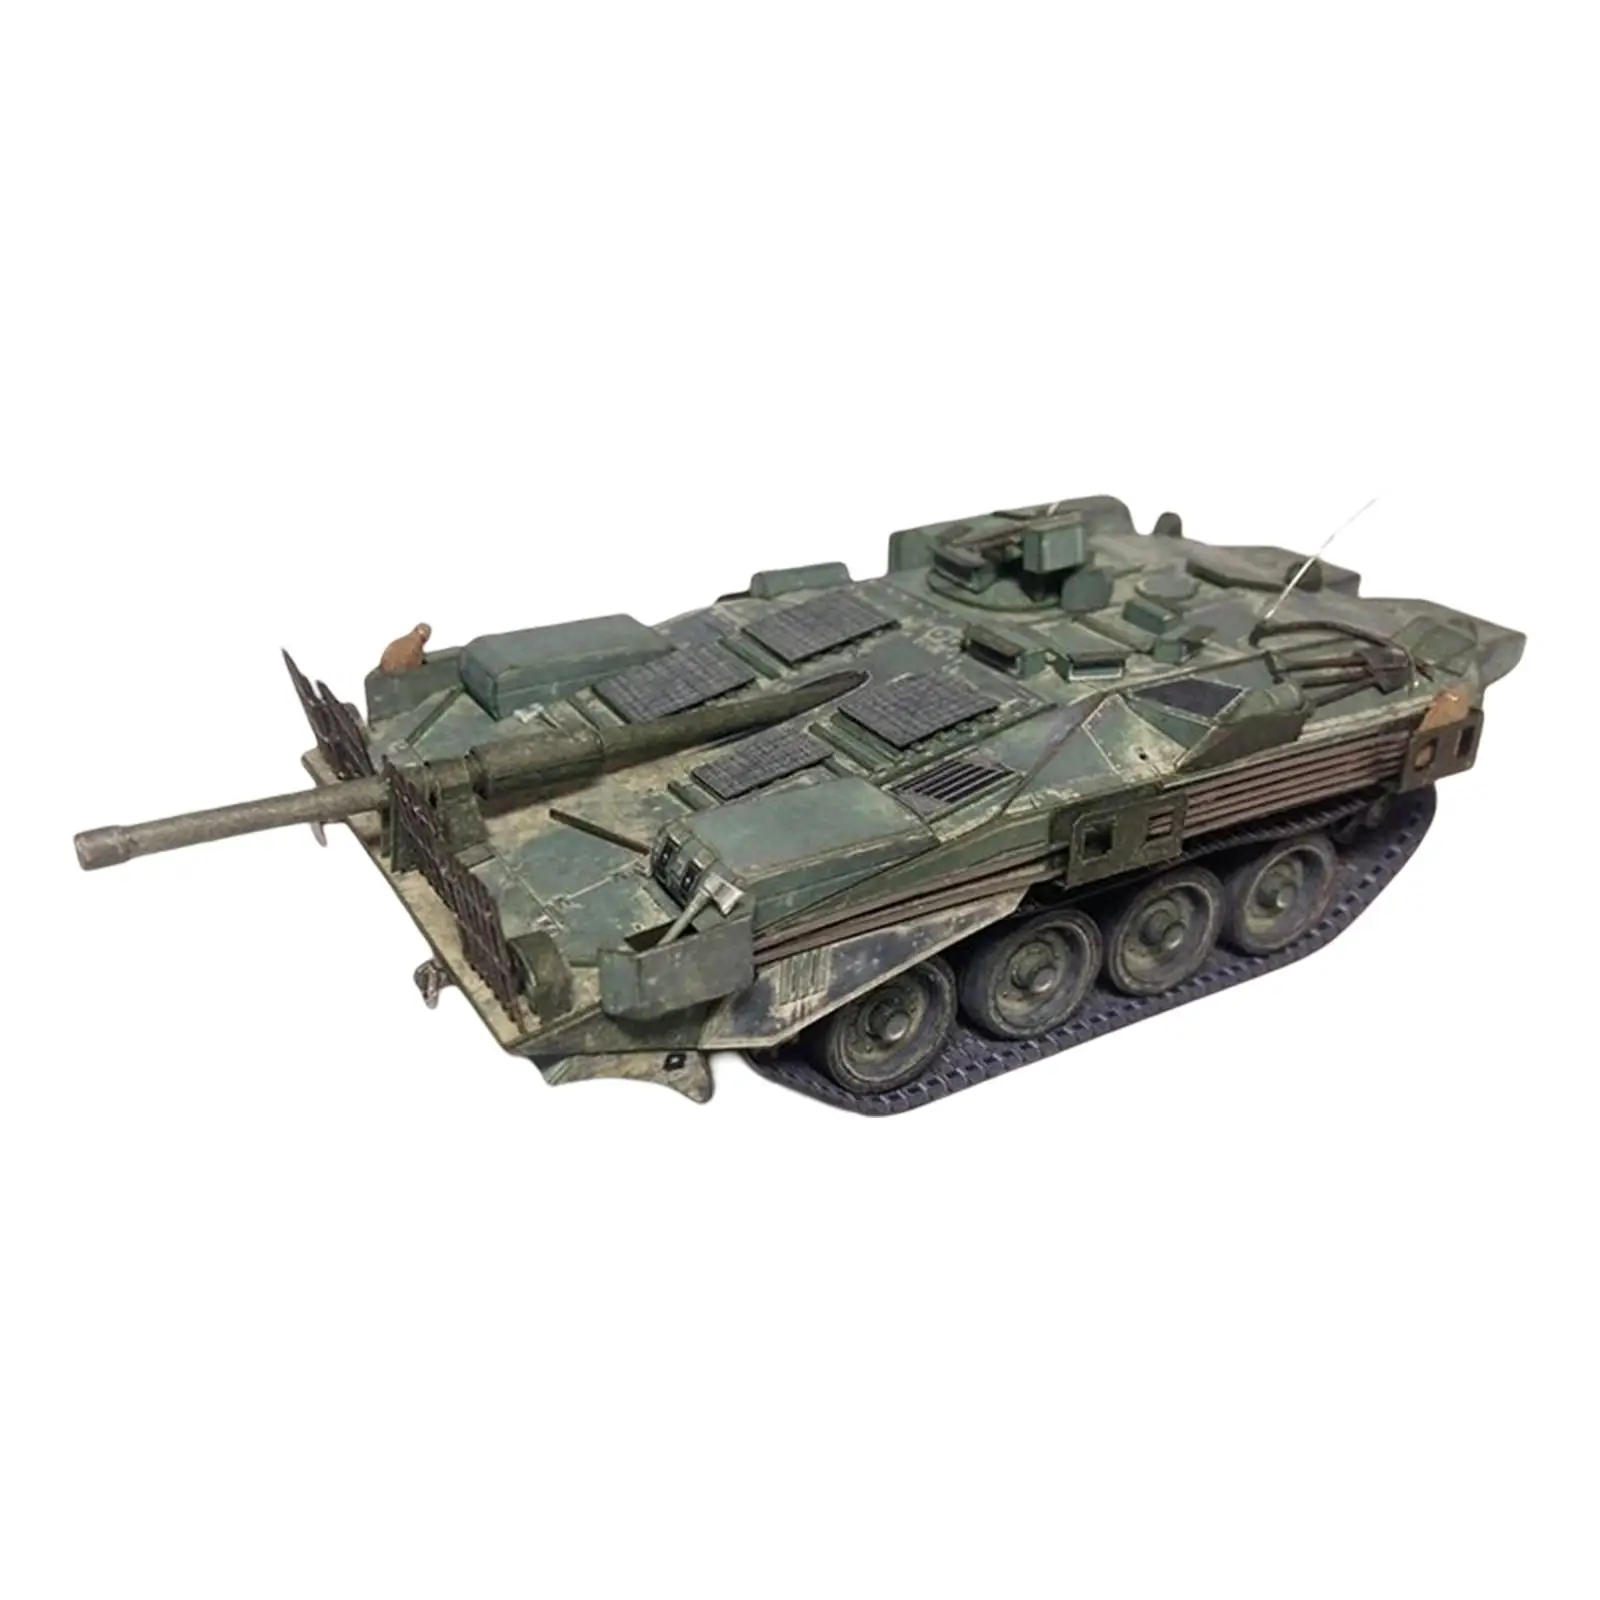 1:35 Scale Tank Model Decoration Collectibles DIY Assemble Educational Toys Paper Model Kit 3D Paper Puzzle for Gift Kids Adults